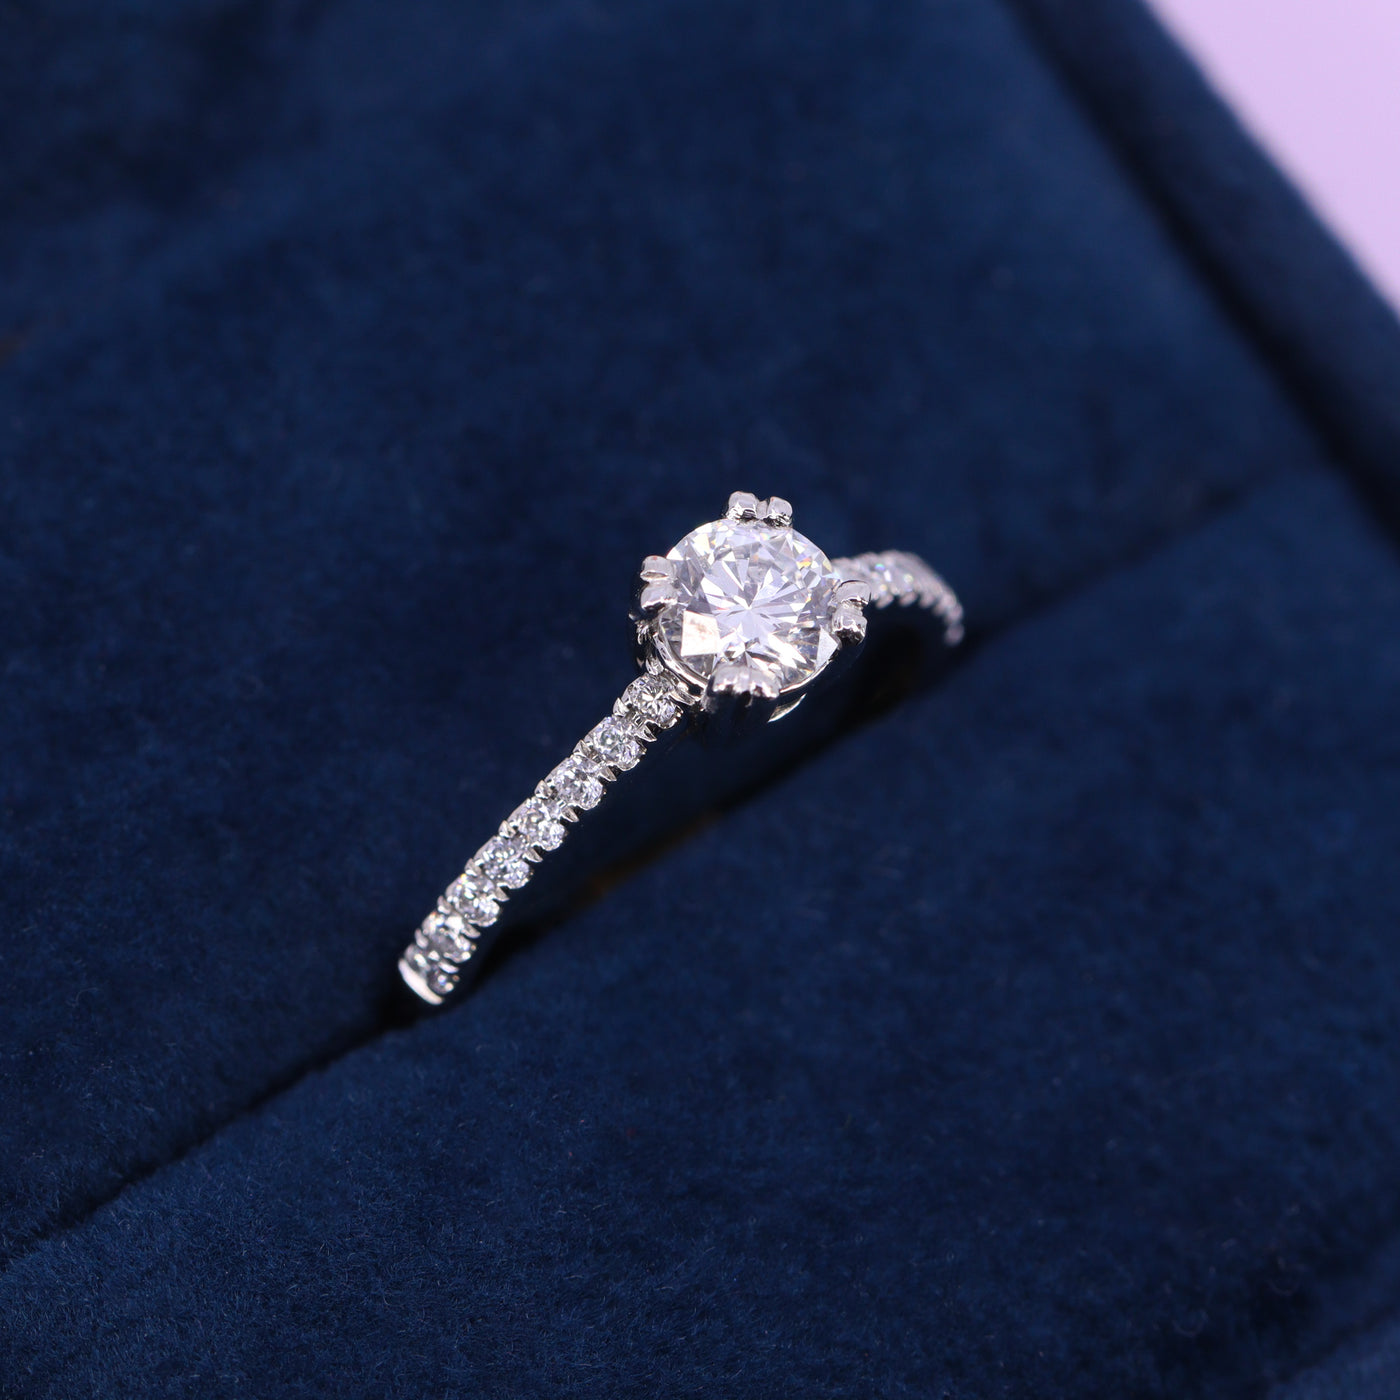 Rebecca - Double Claw Round Brilliant Cut Diamond Ring with Diamond Set Shoulders - Made-to-Order